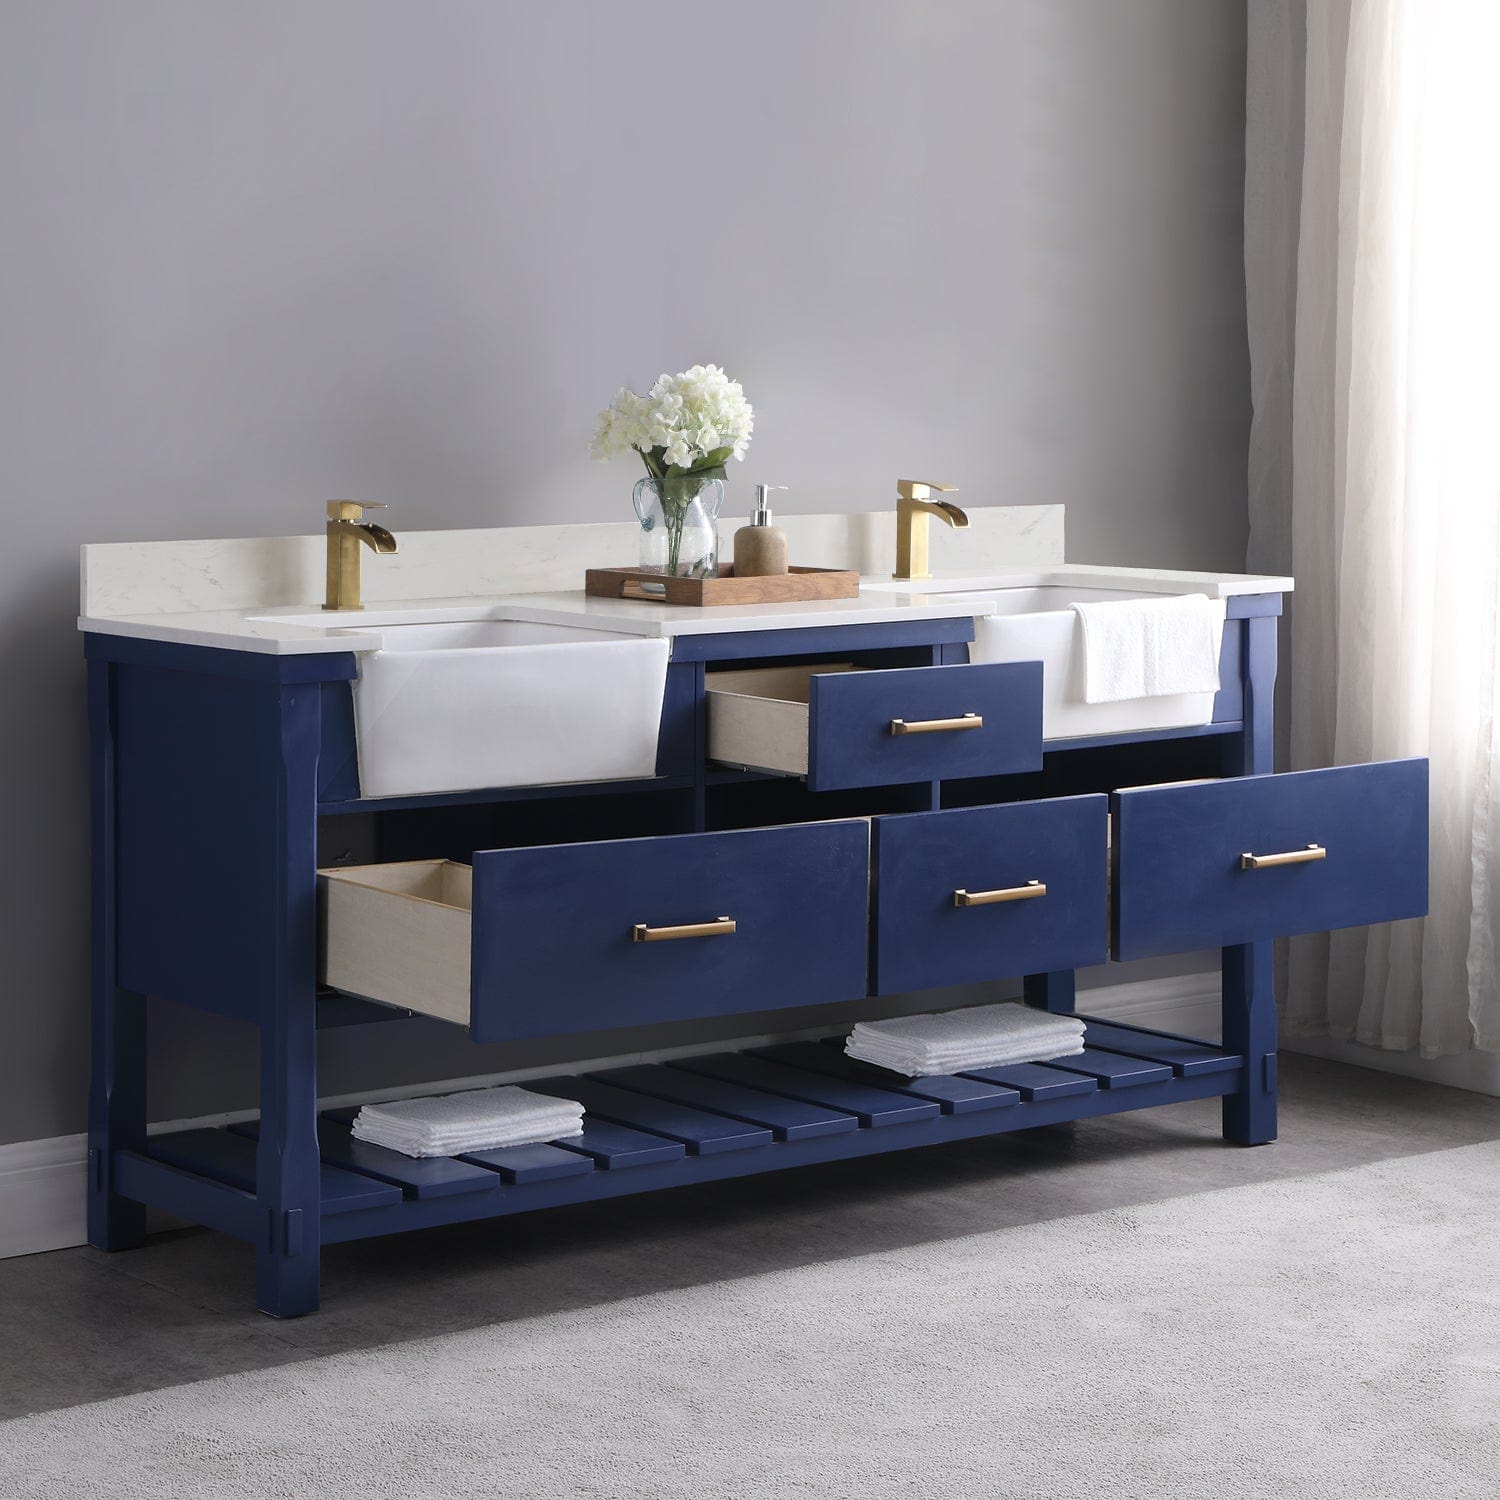 Altair Georgia 72" Double Bathroom Vanity Set in Jewelry Blue and Composite Carrara White Stone Top with White Farmhouse Basin without Mirror 537072-JB-AW-NM - Molaix631112970686Vanity537072-JB-AW-NM